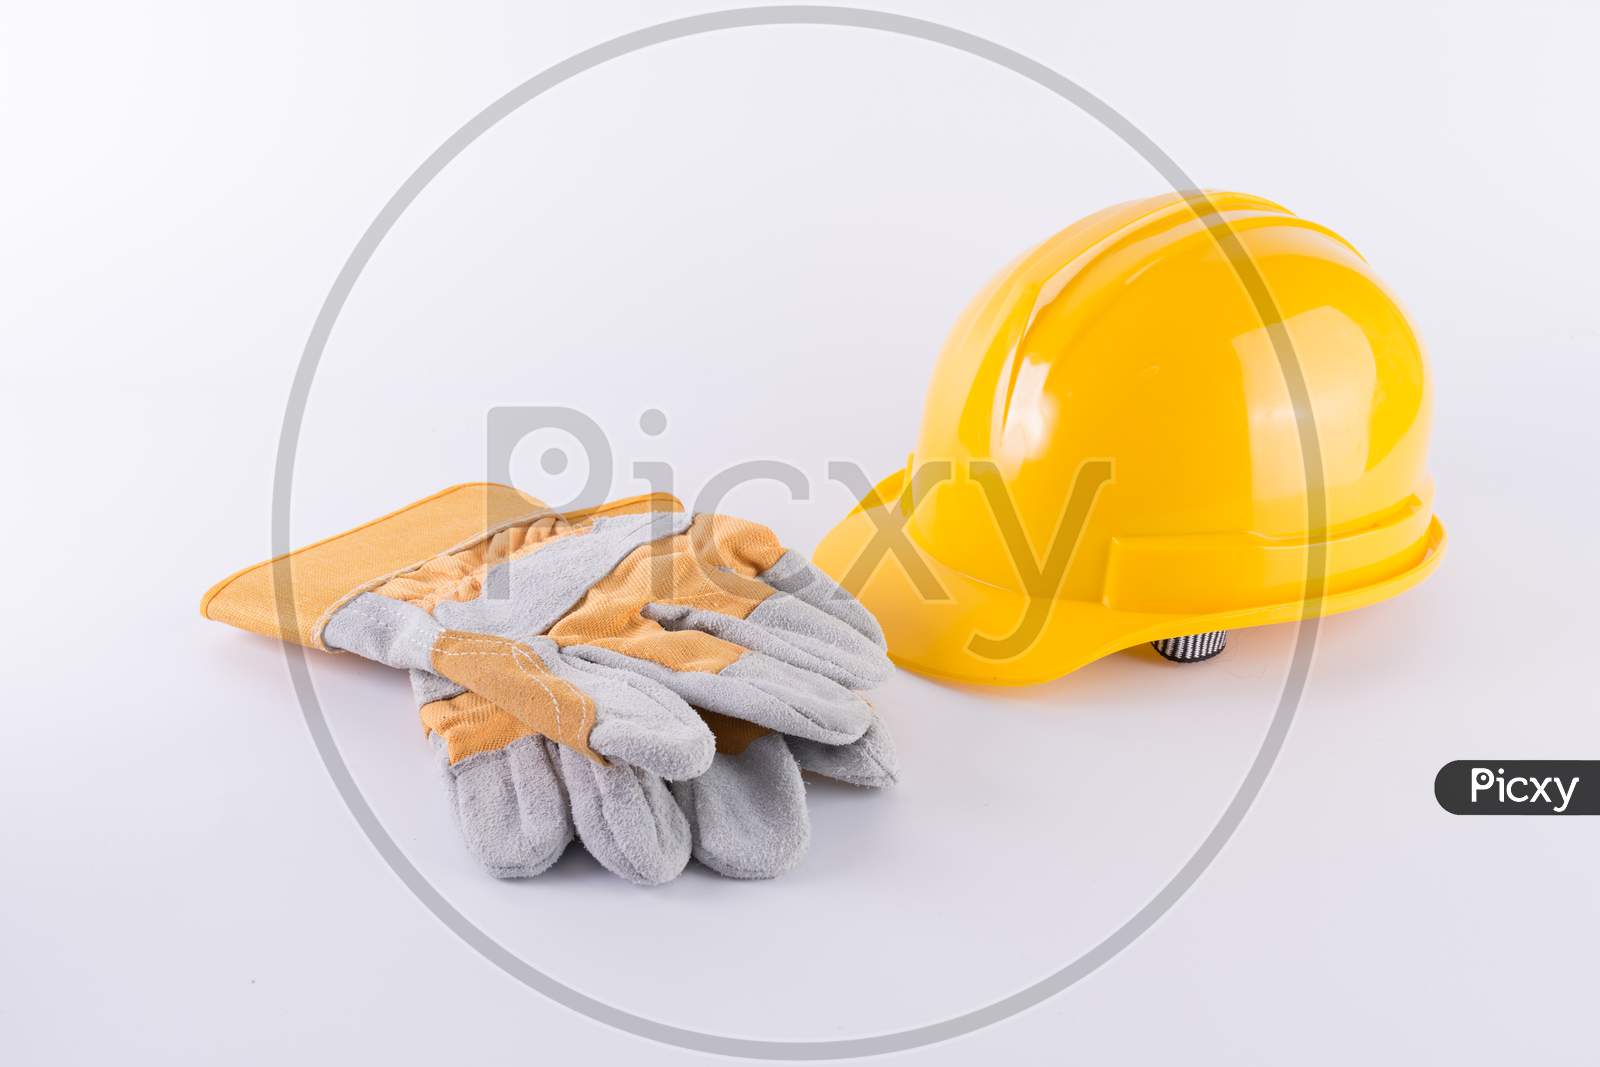 Yellow Safety Helmet And Safety Gloves On White Background. Hard Hat And Thick Gloves On White Isolated Background. Safety Equipment Concept. Worker And Industrial Theme.